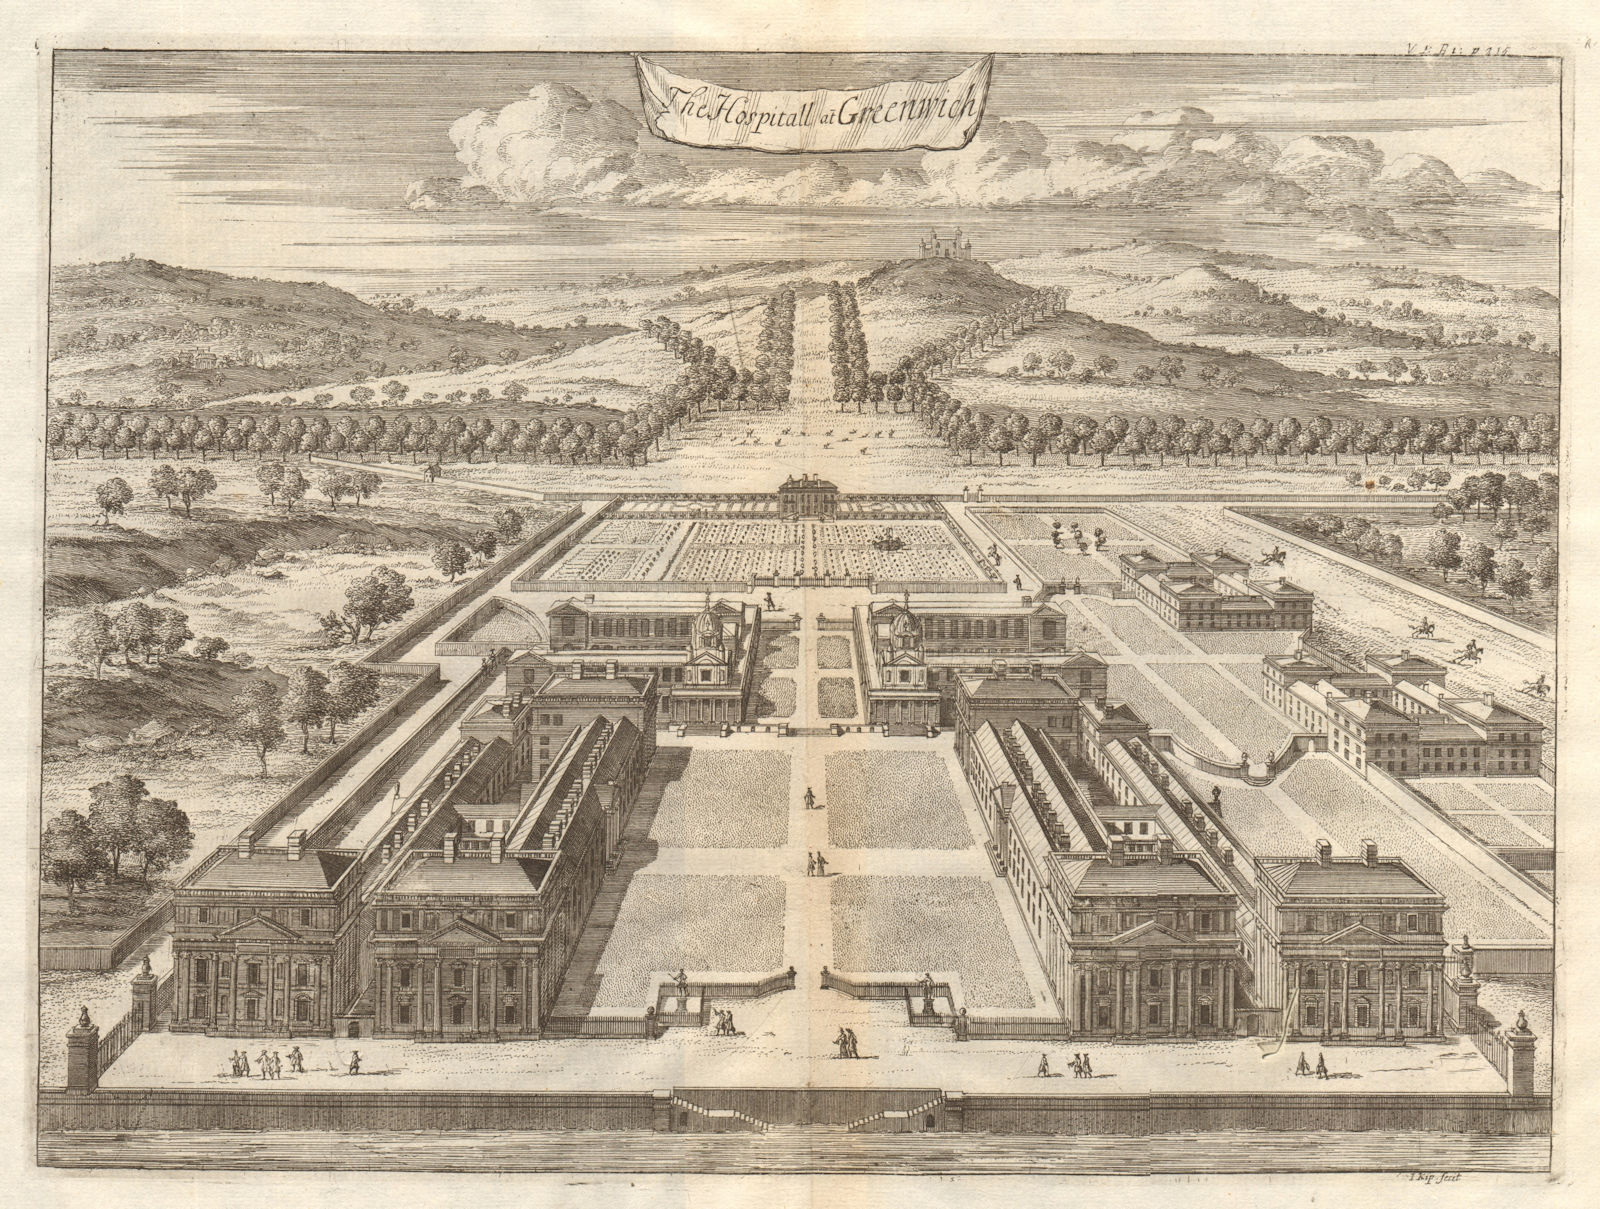 'The Hospitall at Greenwich'. Now the old Royal Naval College. STOW/STRYPE 1720